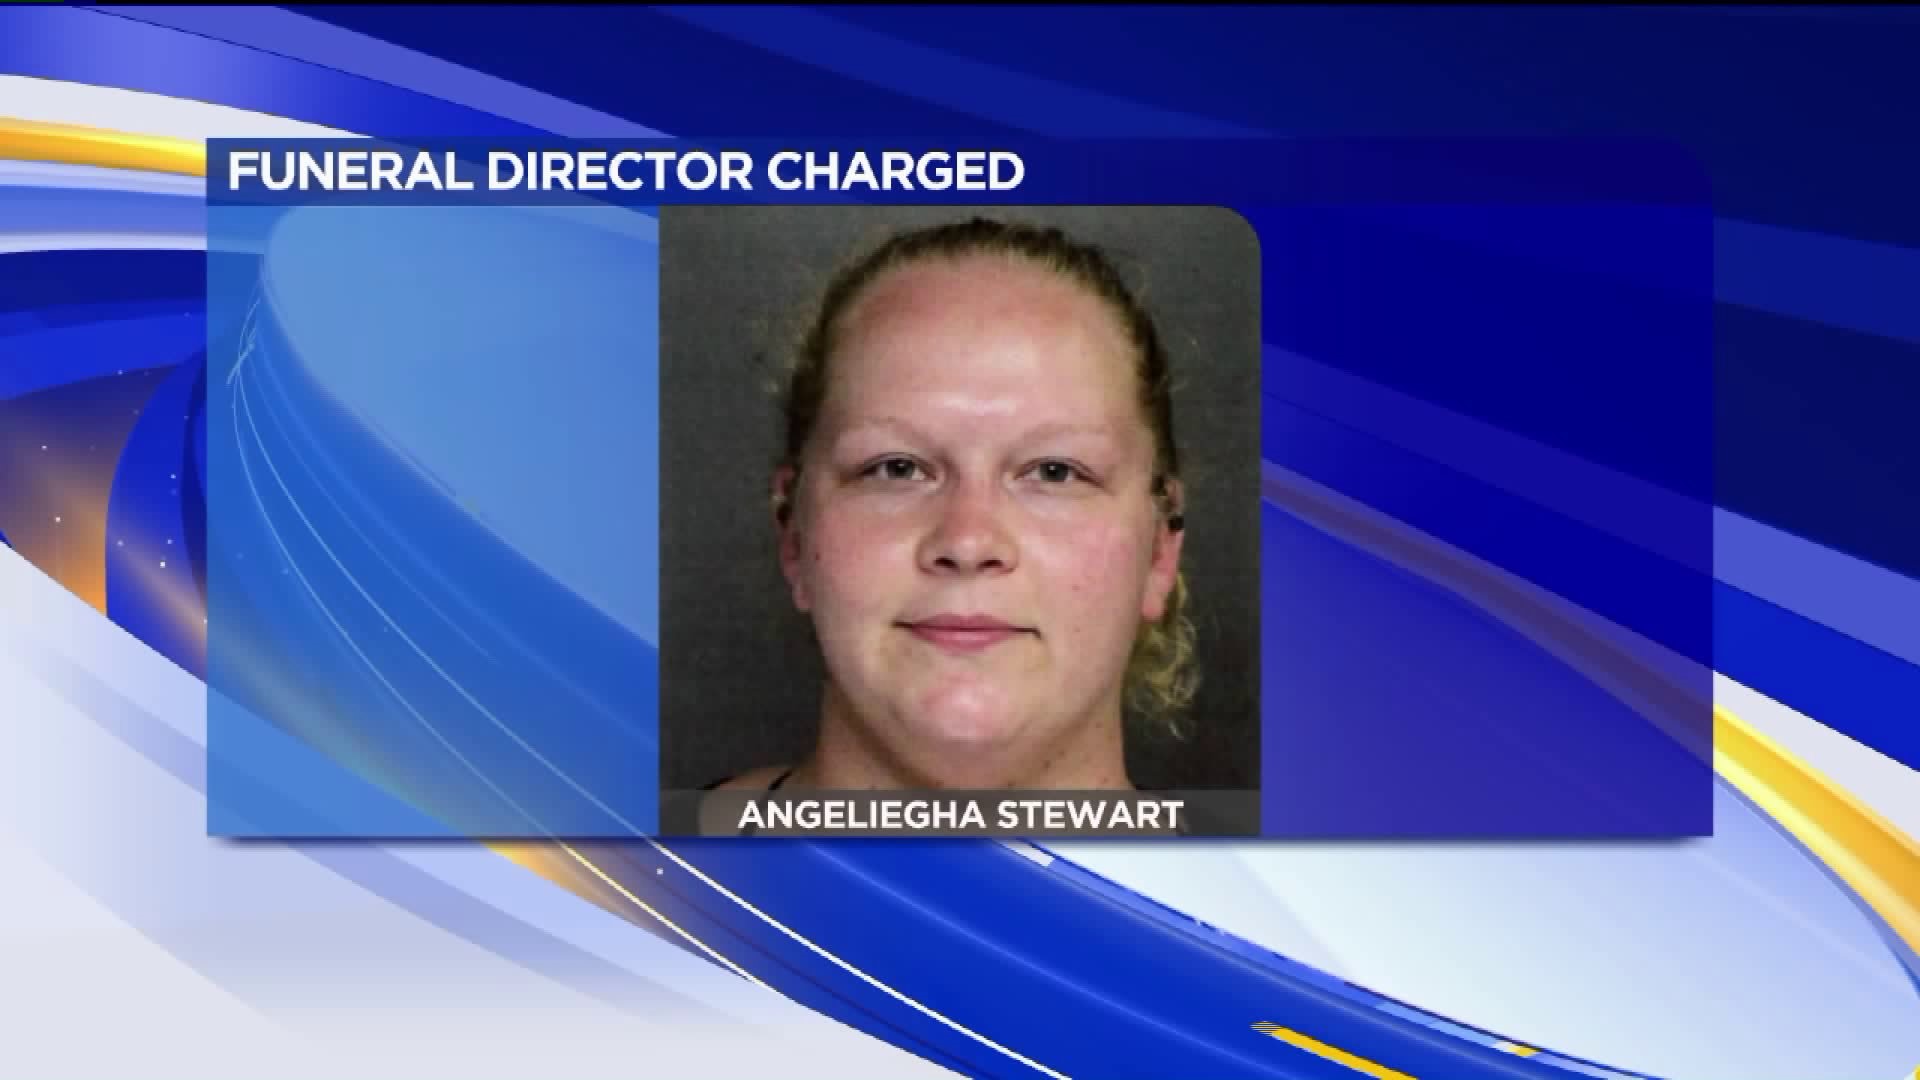 More Charges Filed Against Funeral Director